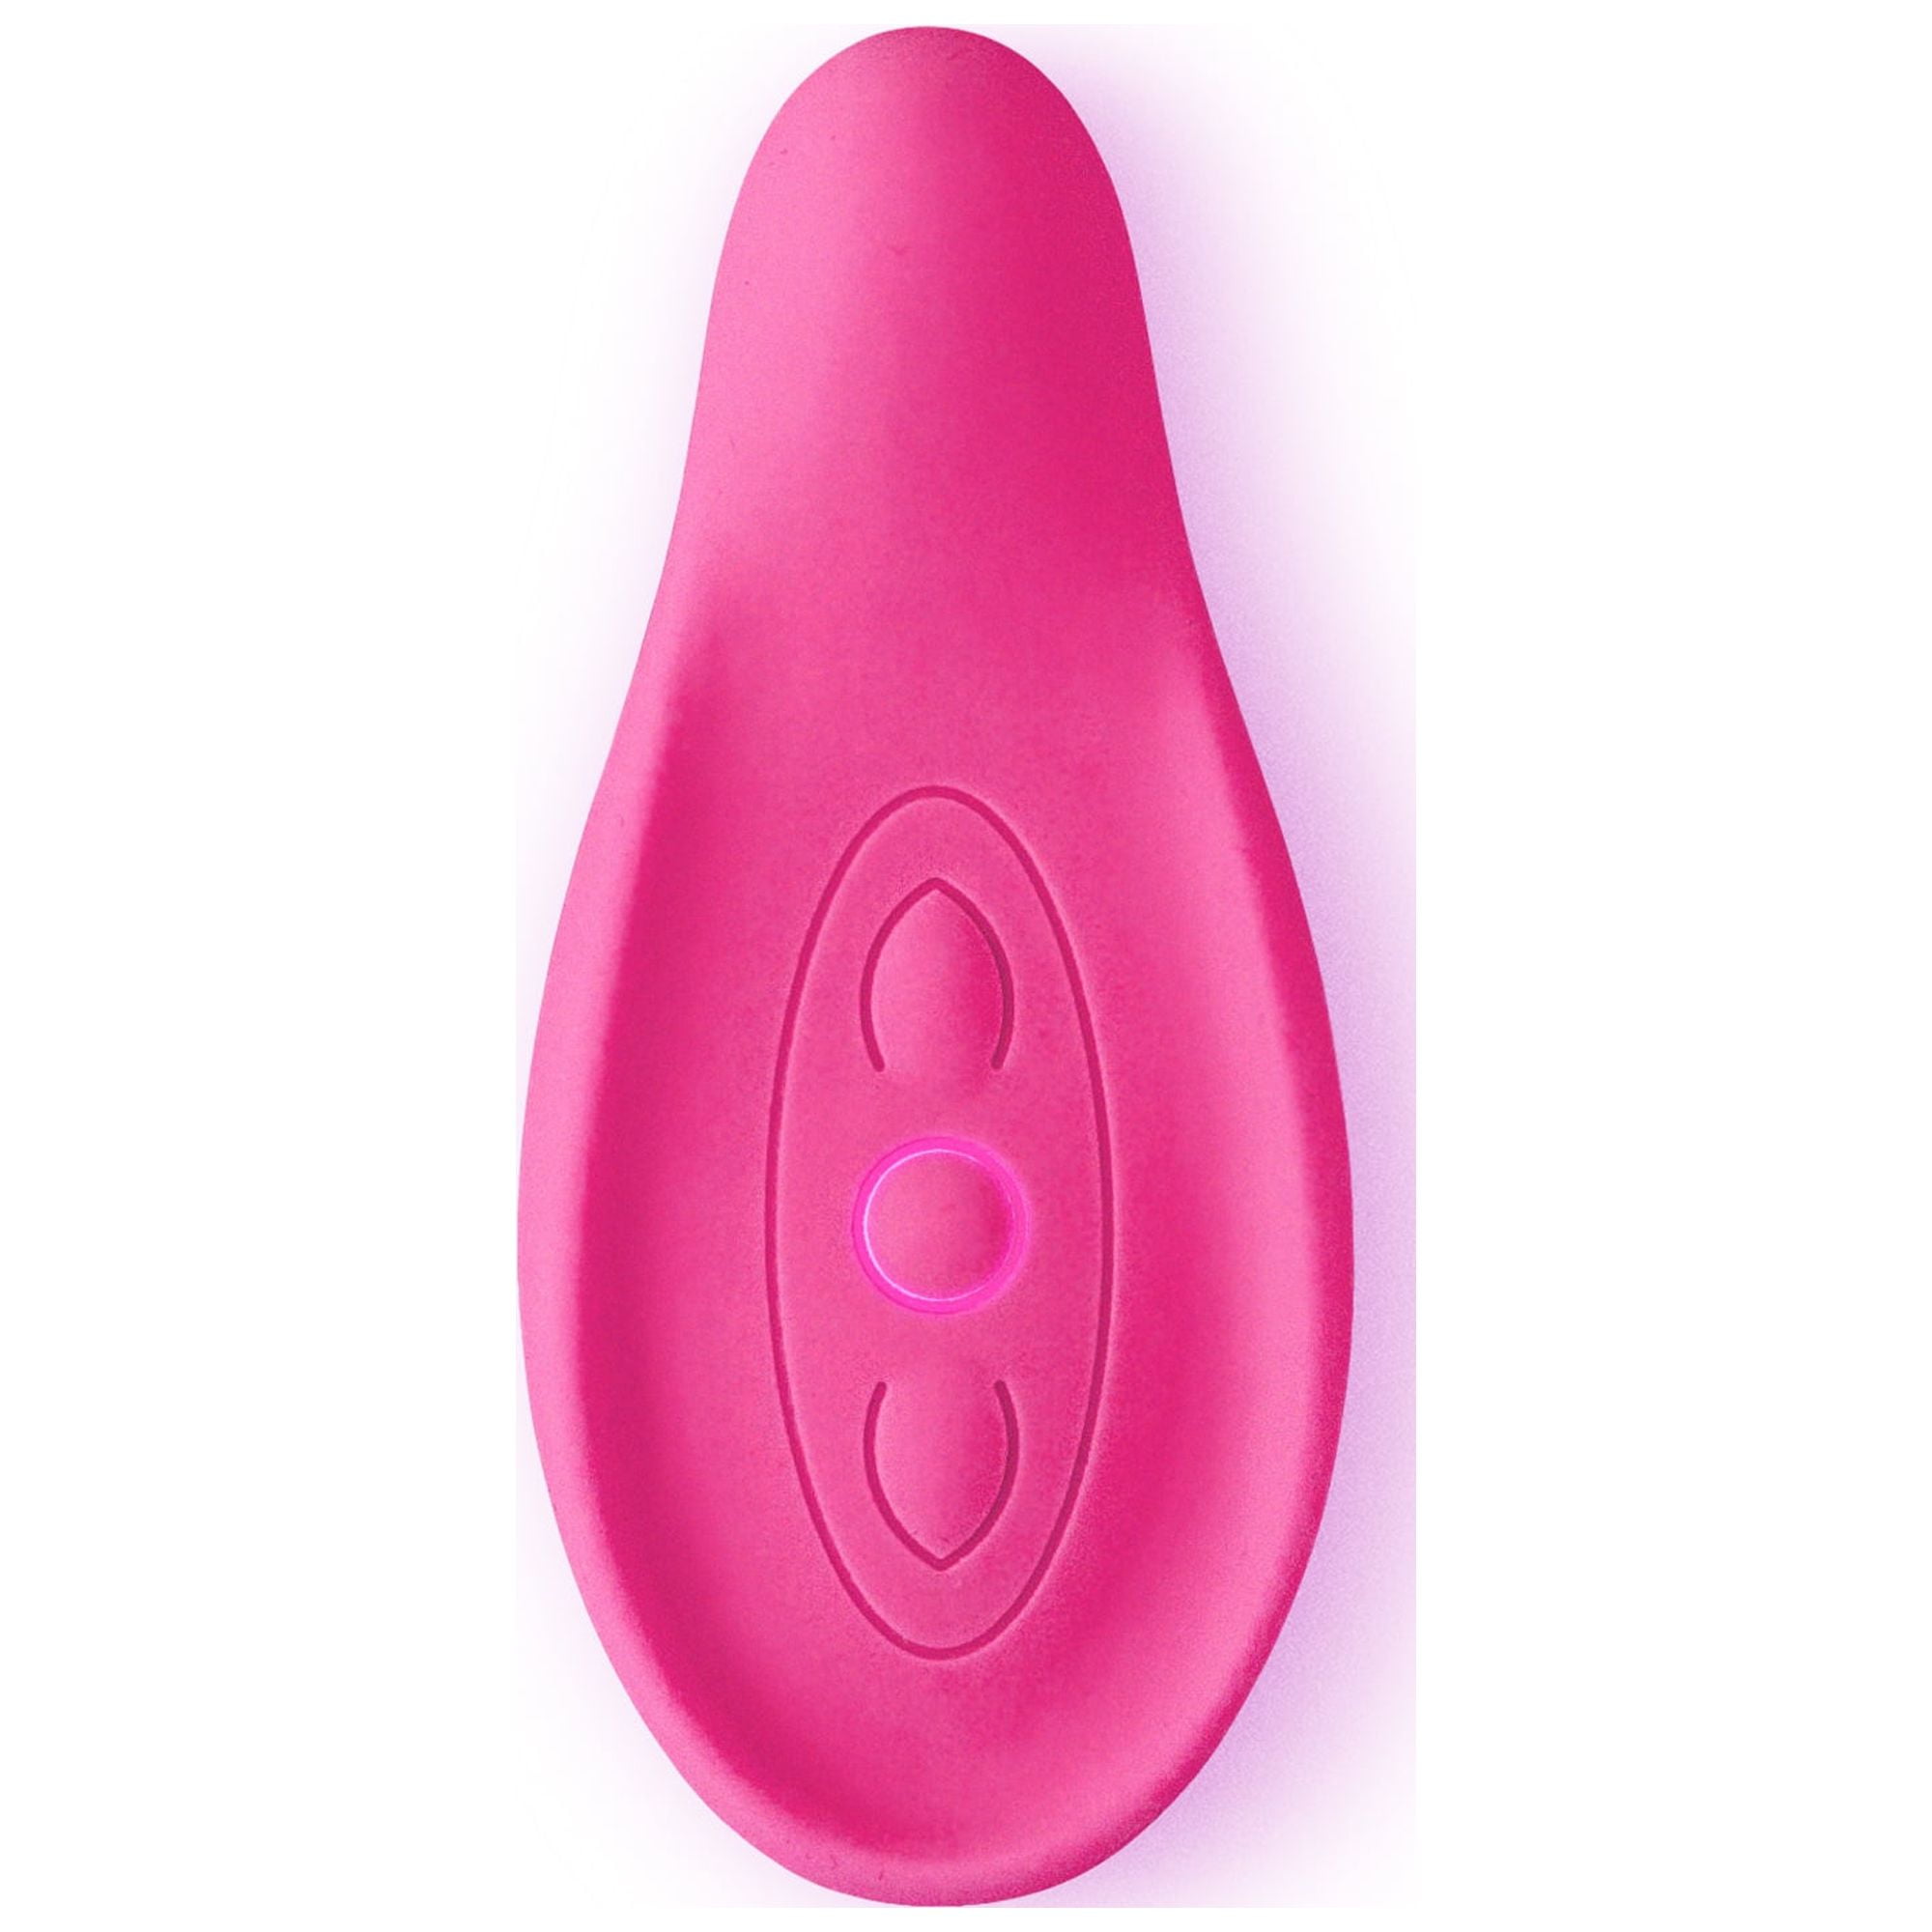 LaVie Lactation Massager, Rose, Breastfeeding Support for Clogged Ducts,  Mastitis, Improve Milk Flow, Engorgement, Waterproof 